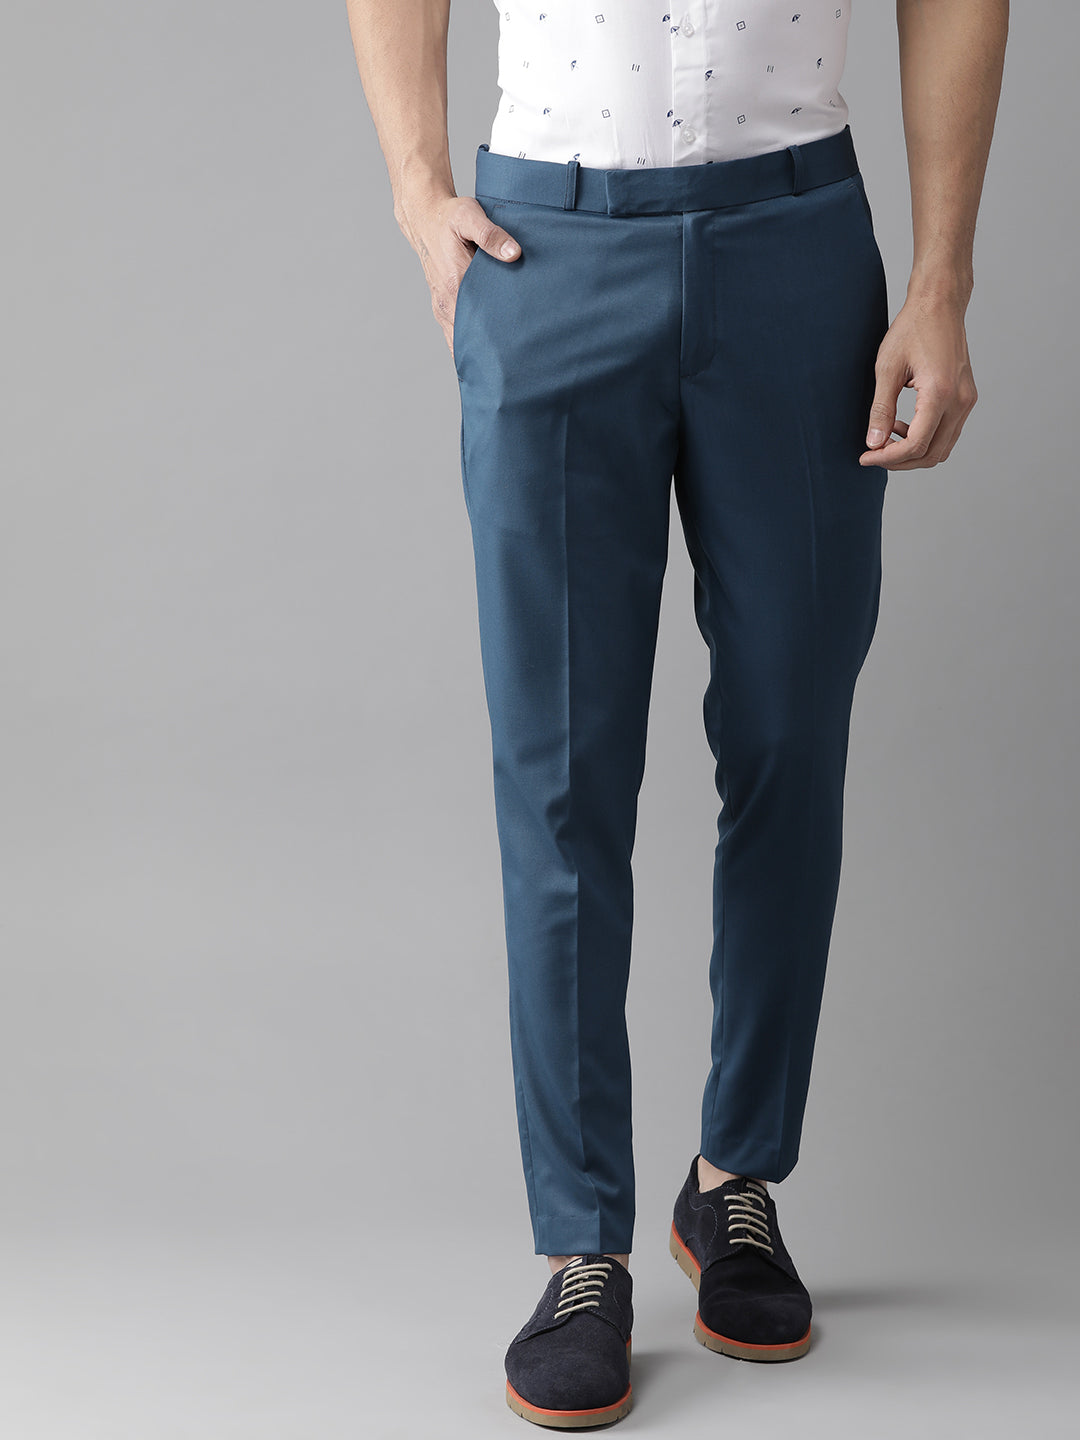 DENNISON Men Blue Smart Tapered Fit Smart Casual Trousers